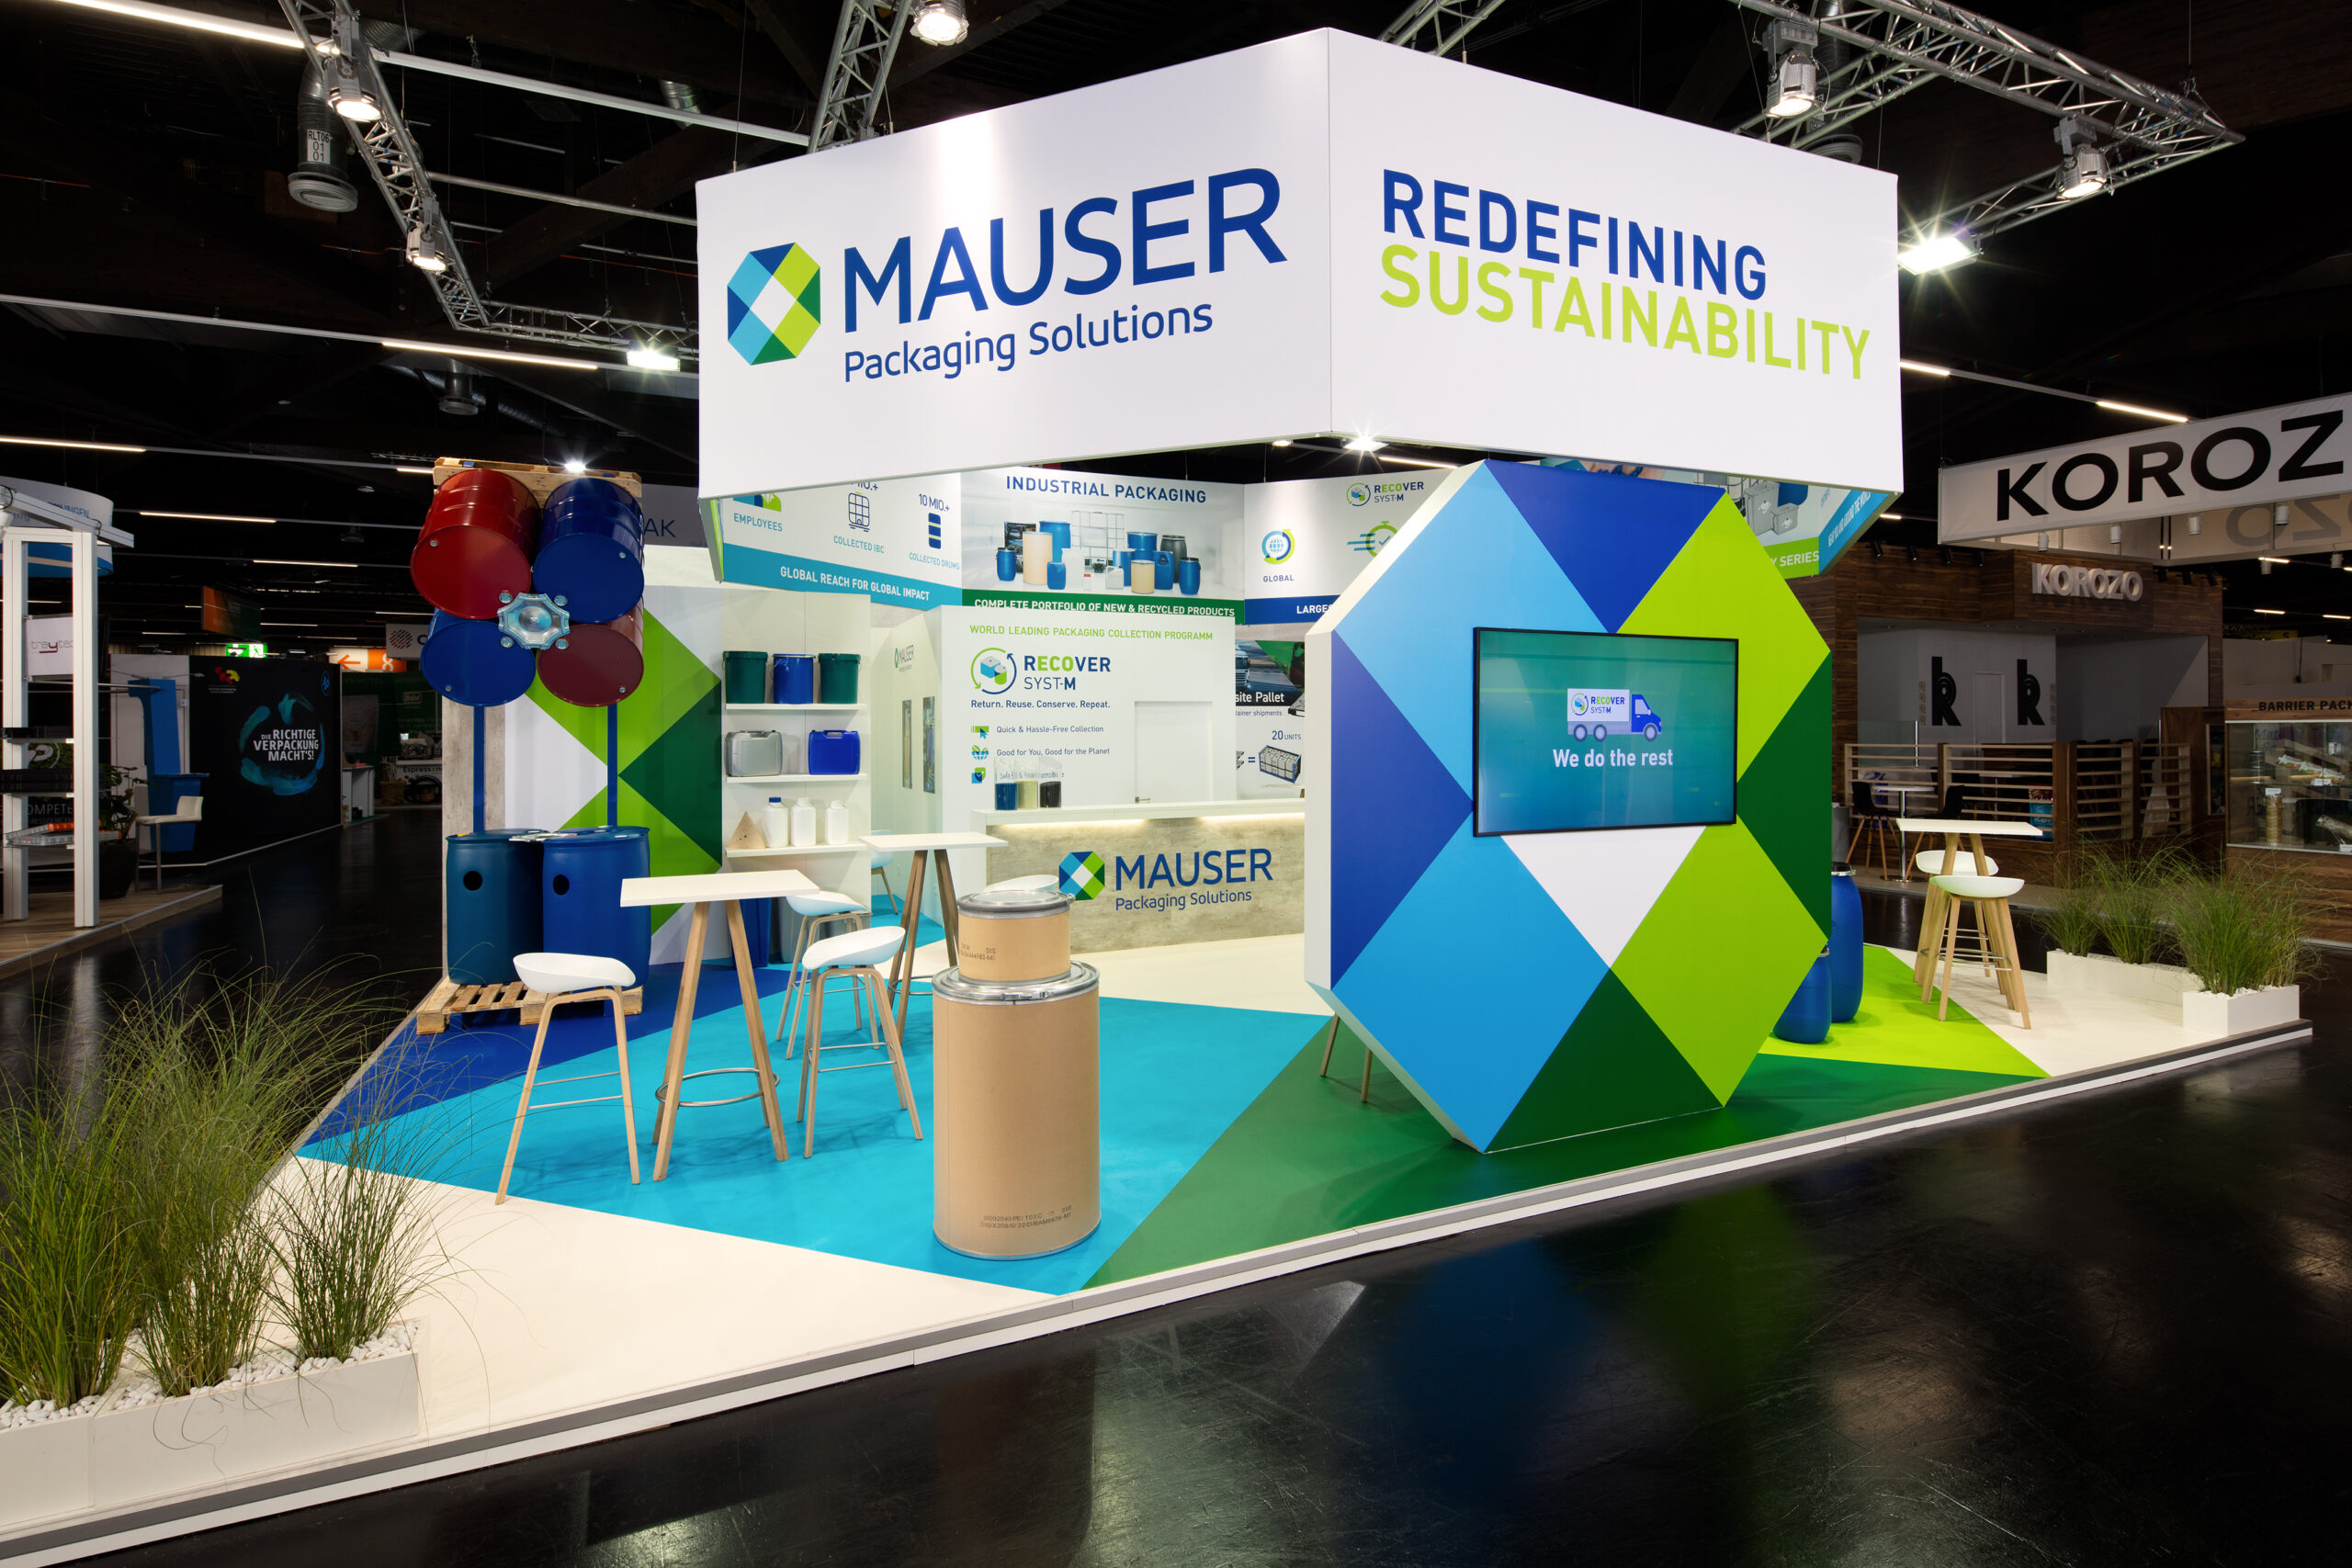 Front of the booth Mauser Packaging Solutions